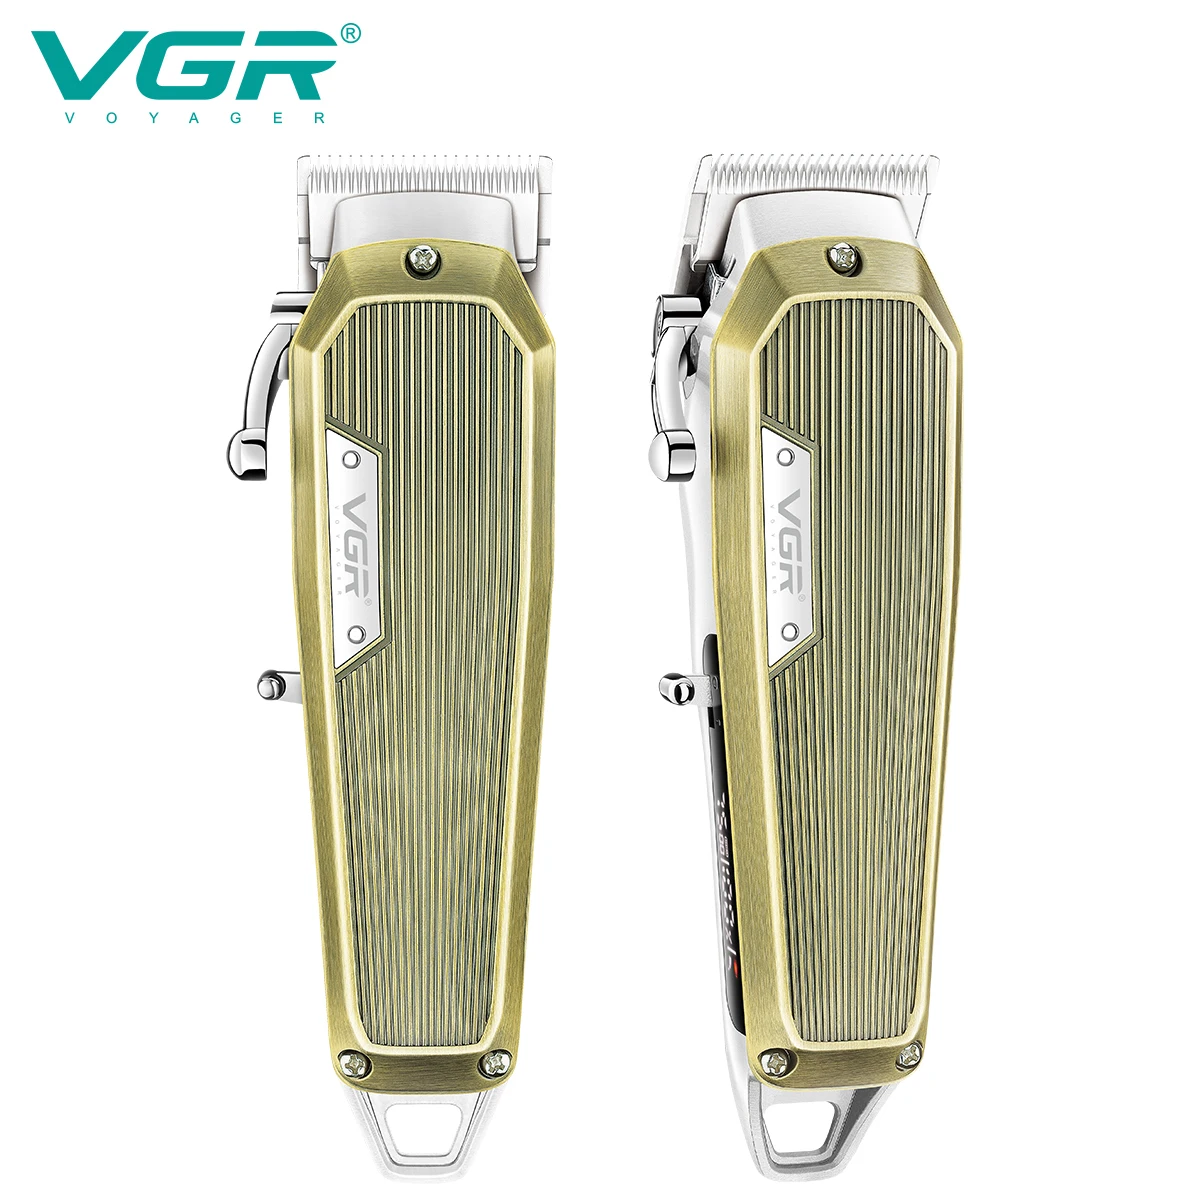 

VGR Hair Clipper Rechargeable Hair Cutting Machine Professional Trimmer Cordless Haircut Machine Vintage Clippers for Men V-667